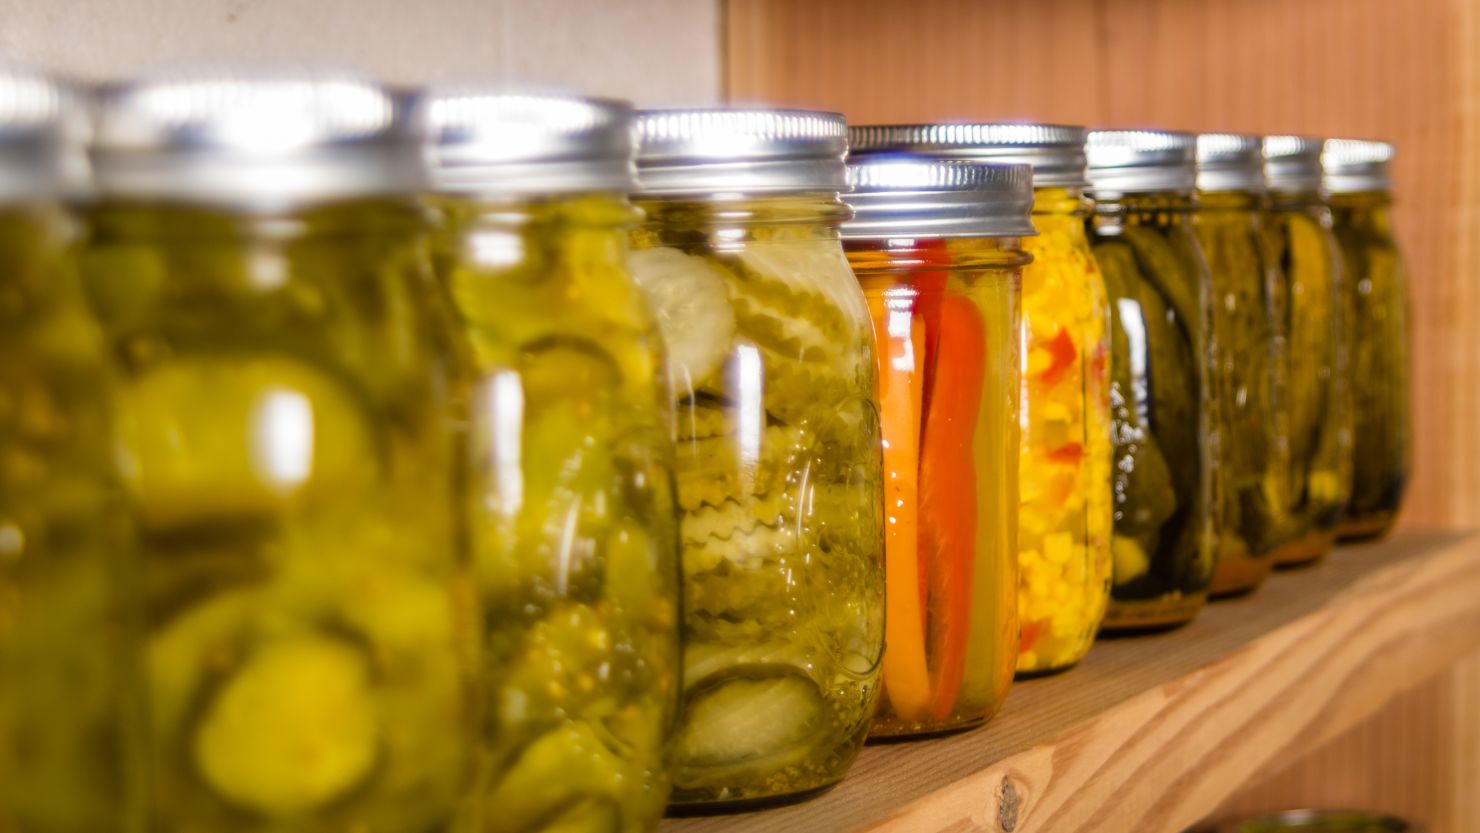 Mason Jar Shortage 2020: What's Causing It & How Bad Is It